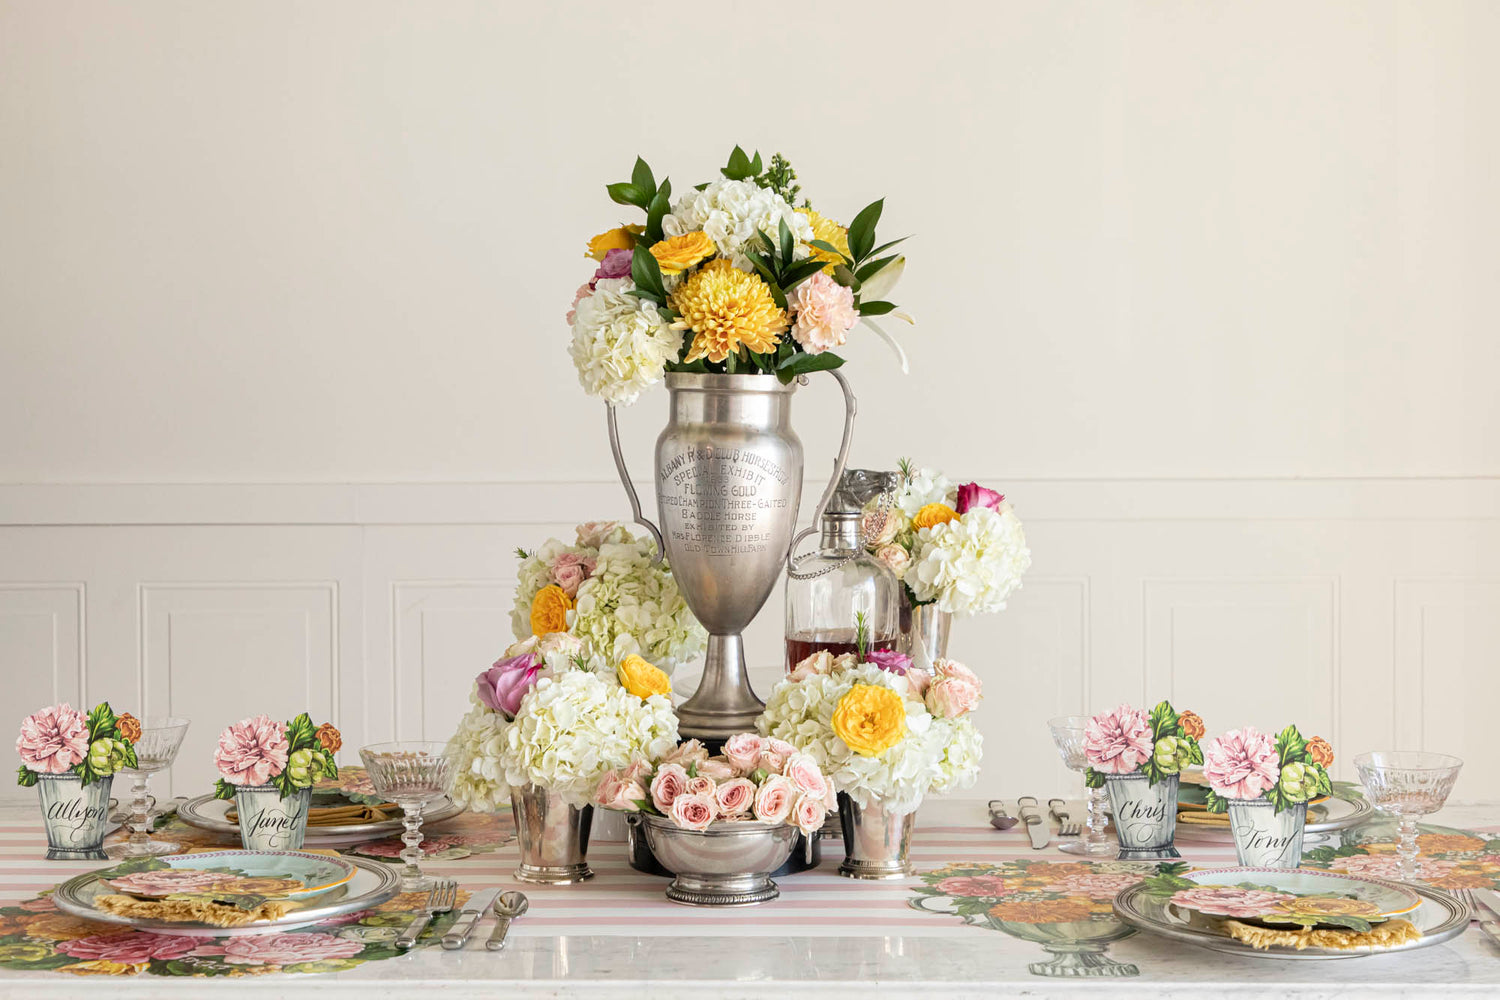 The Die-cut Garden Trophy Placemat in an elegant table setting for four, featuring a silver trophy in the floral centerpiece.